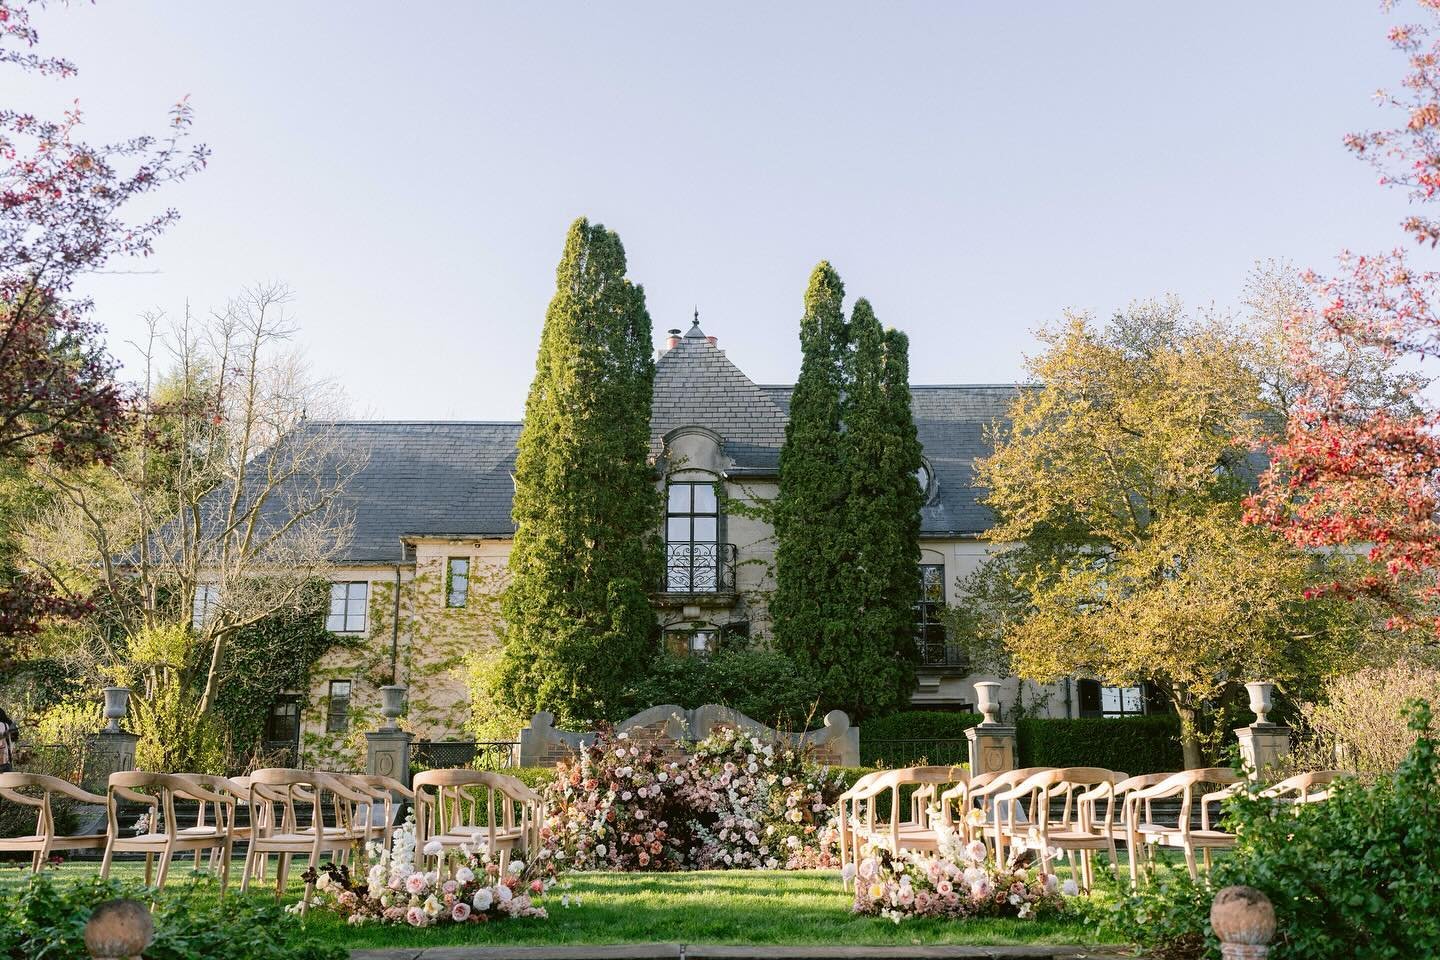 An evocative European manor nestled in the quiet countryside of southern Michigan.
⠀⠀⠀⠀⠀⠀⠀⠀⠀
It&rsquo;s impossible to be at @greencrest_manor and not feel the magic of the entire experience. From the tree-lined drive, lush gardens, and exceptional ho